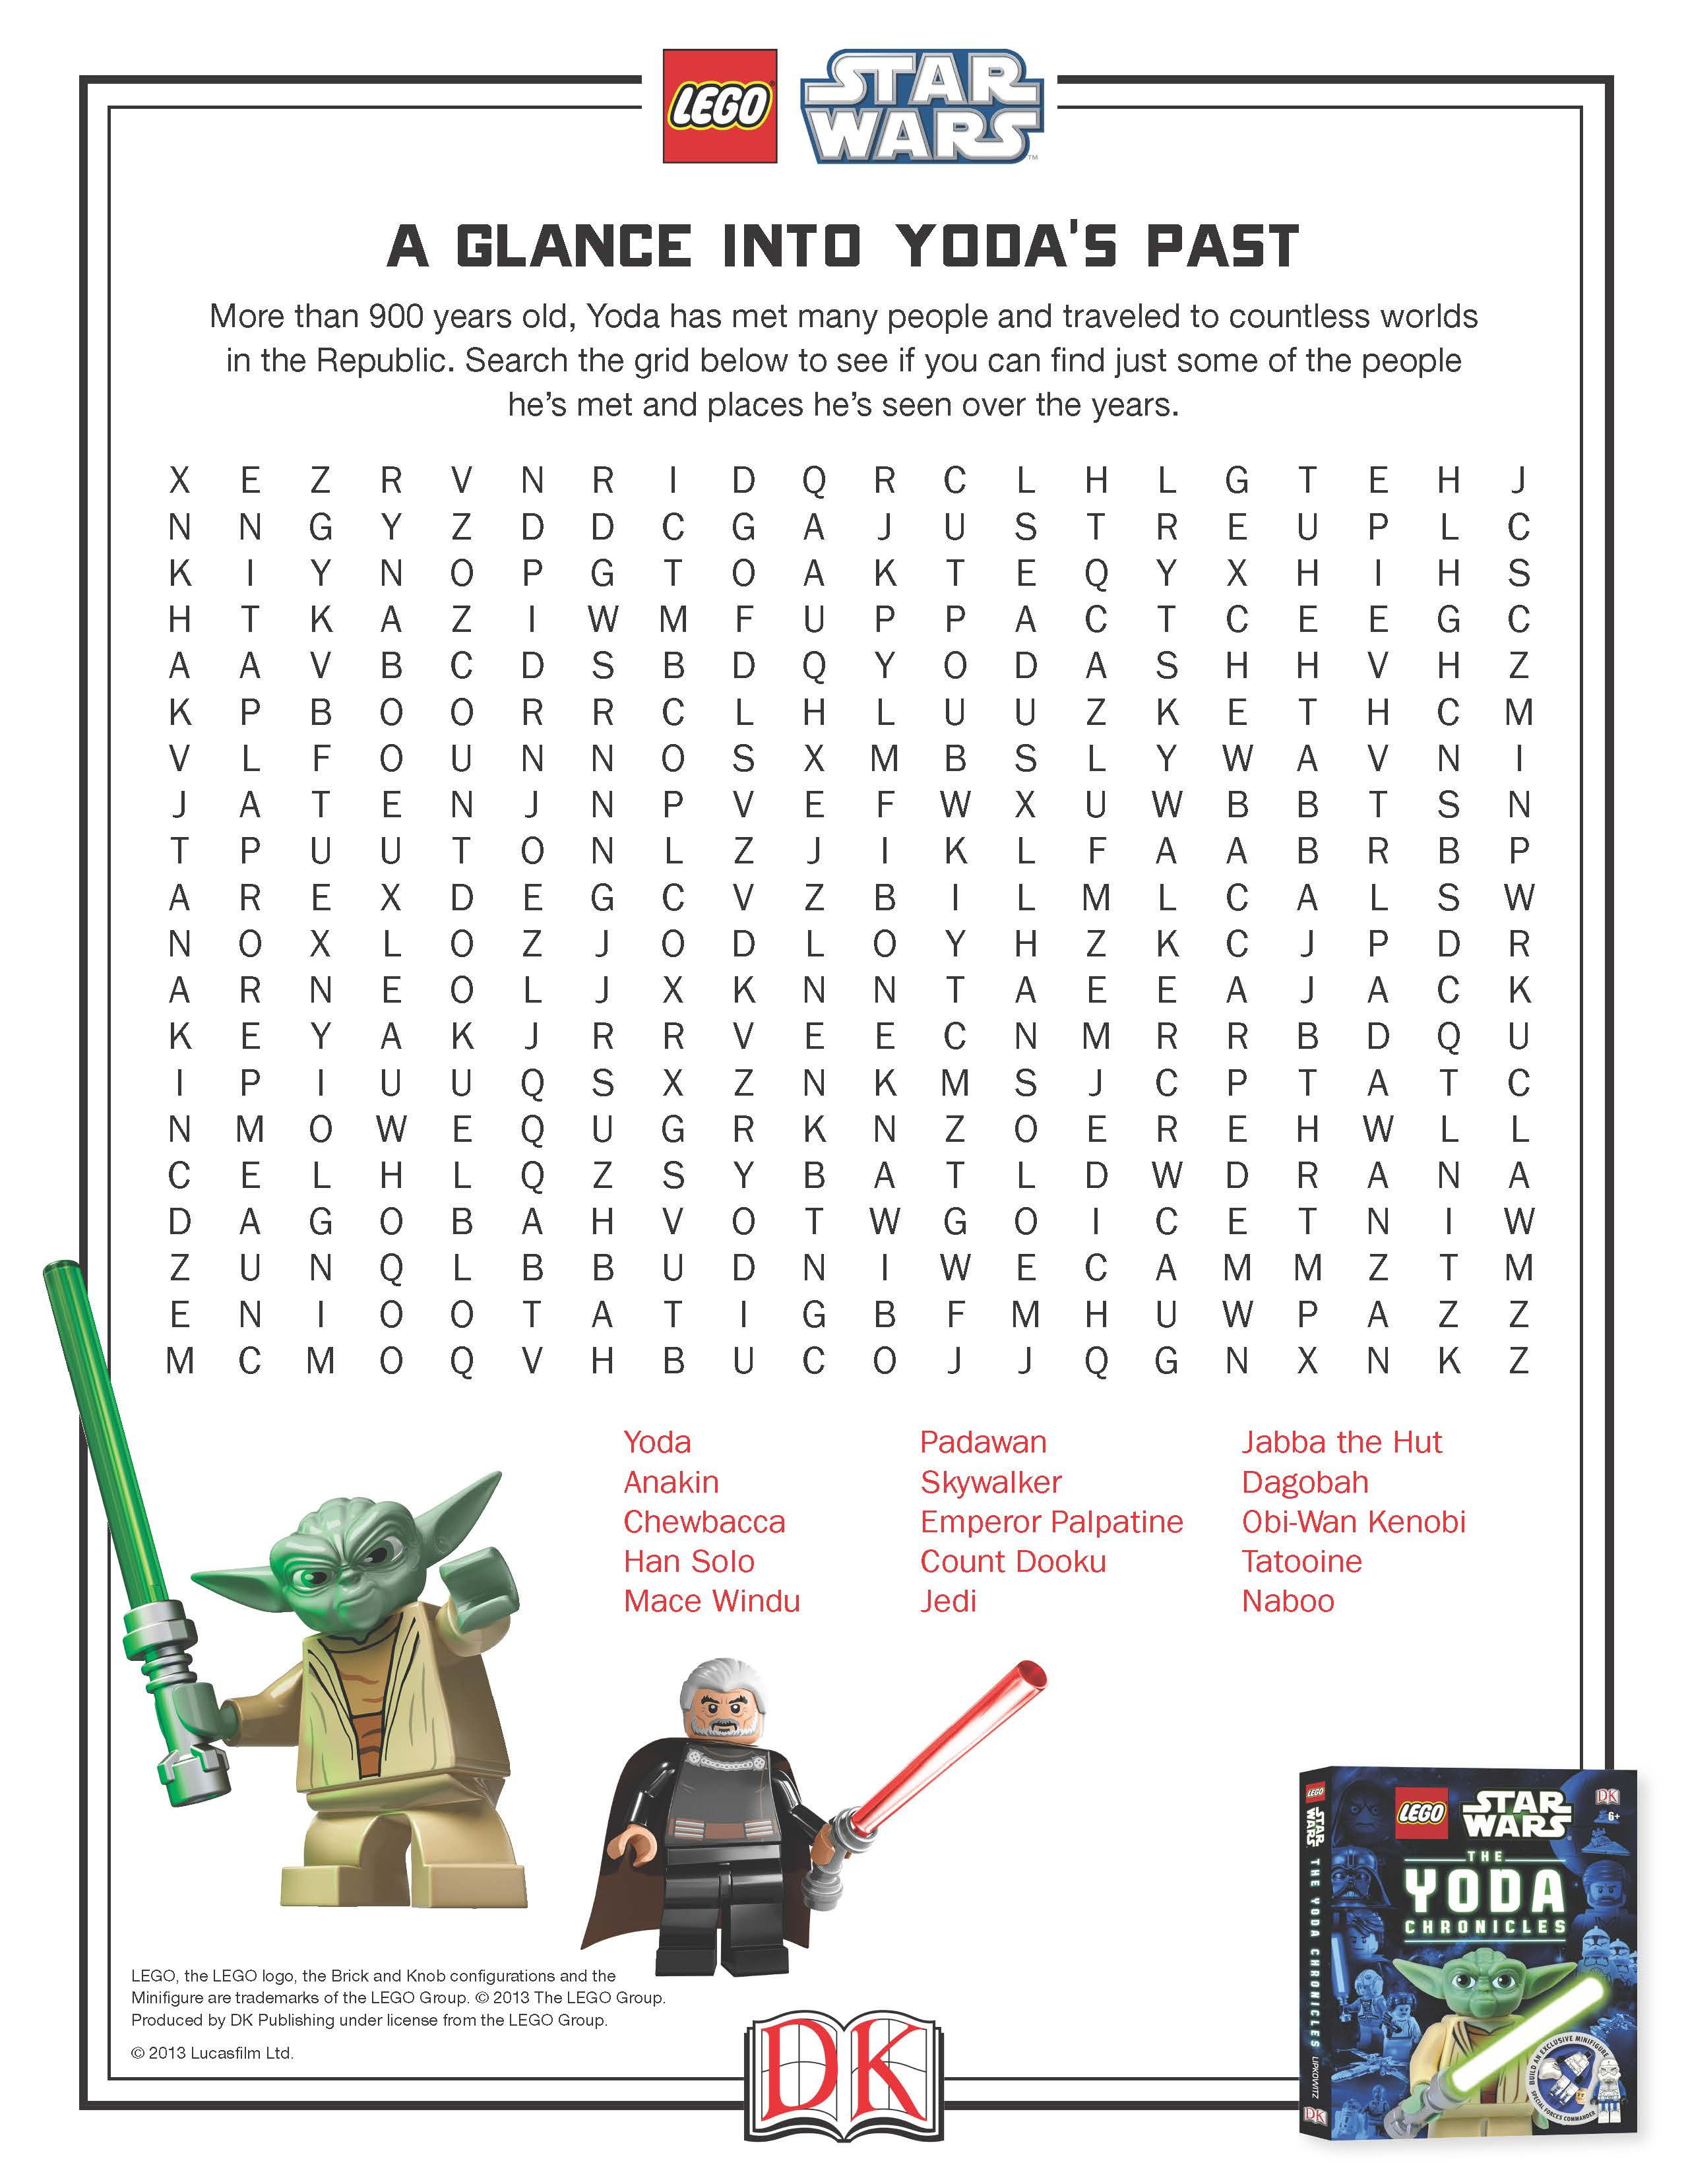 Star Wars Printables And Activities | Brightly - Star Wars Crossword Puzzle Printable